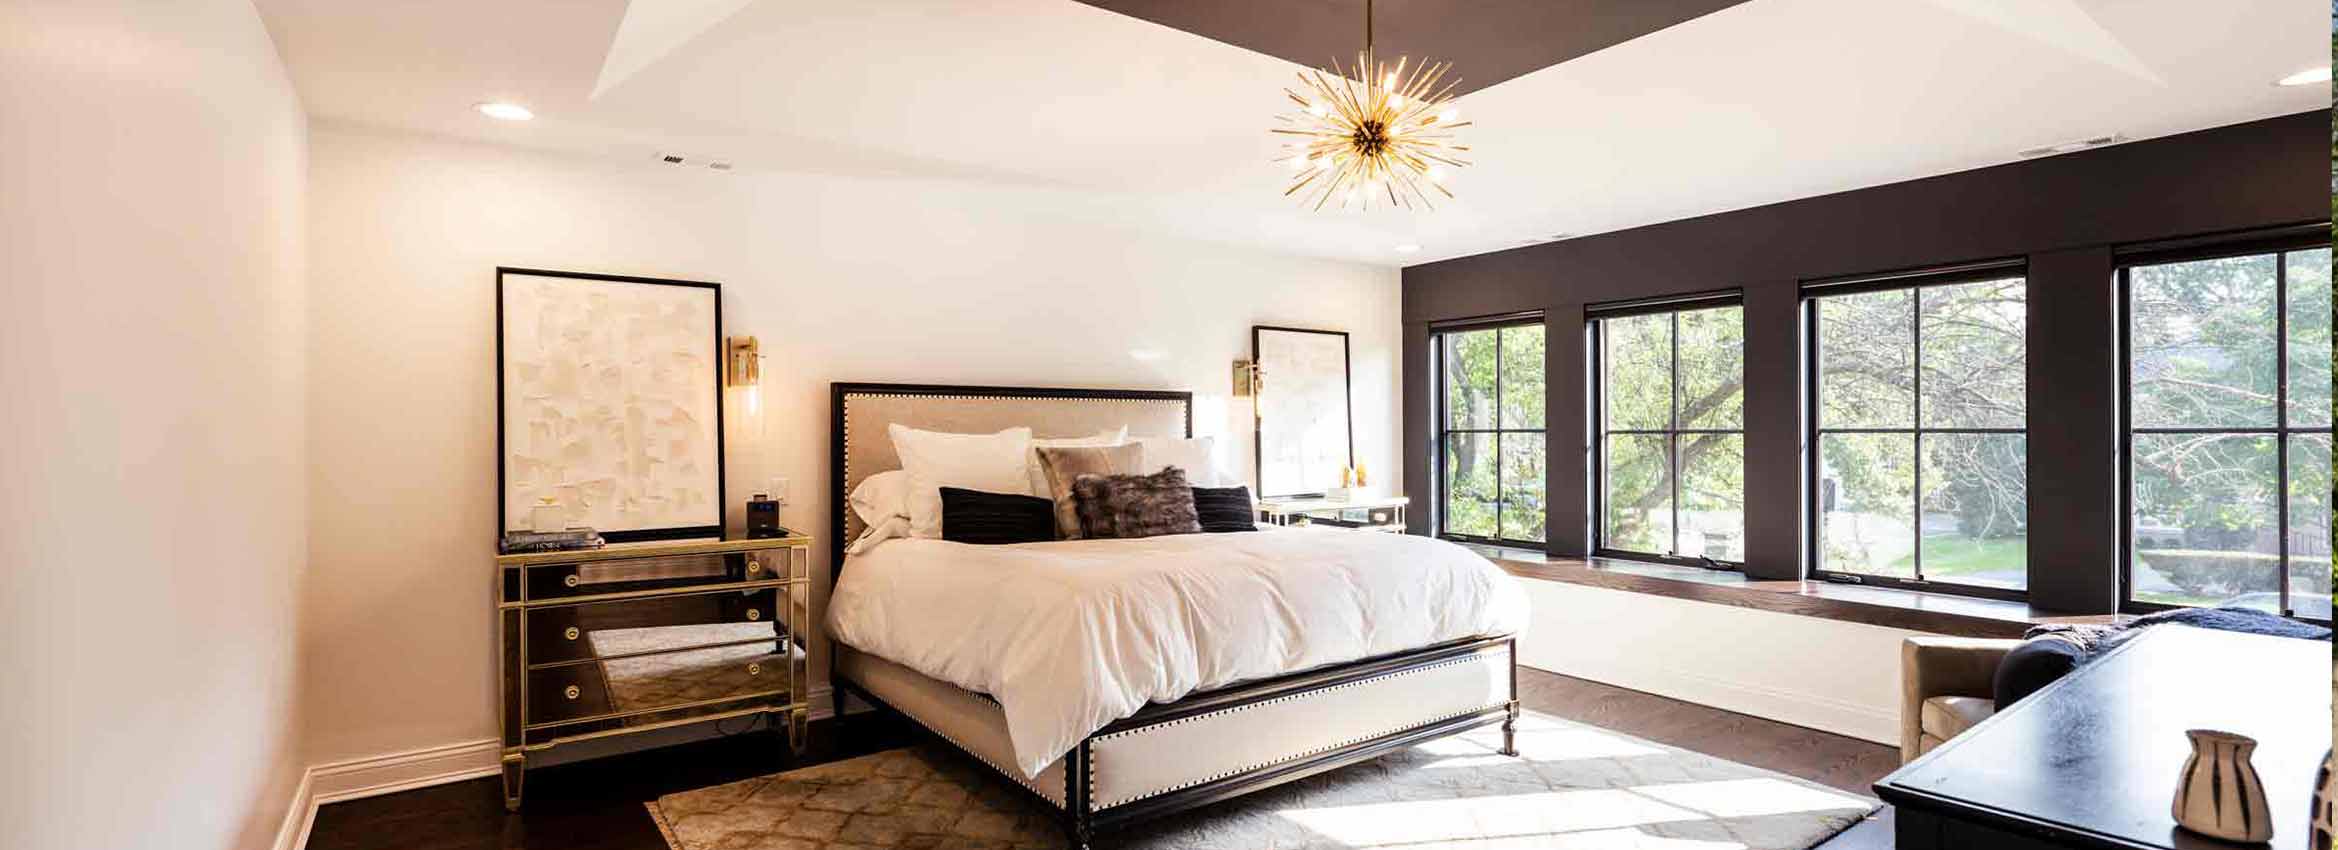 view of luxury bedroom addition in hinsdale illinois by LivCo